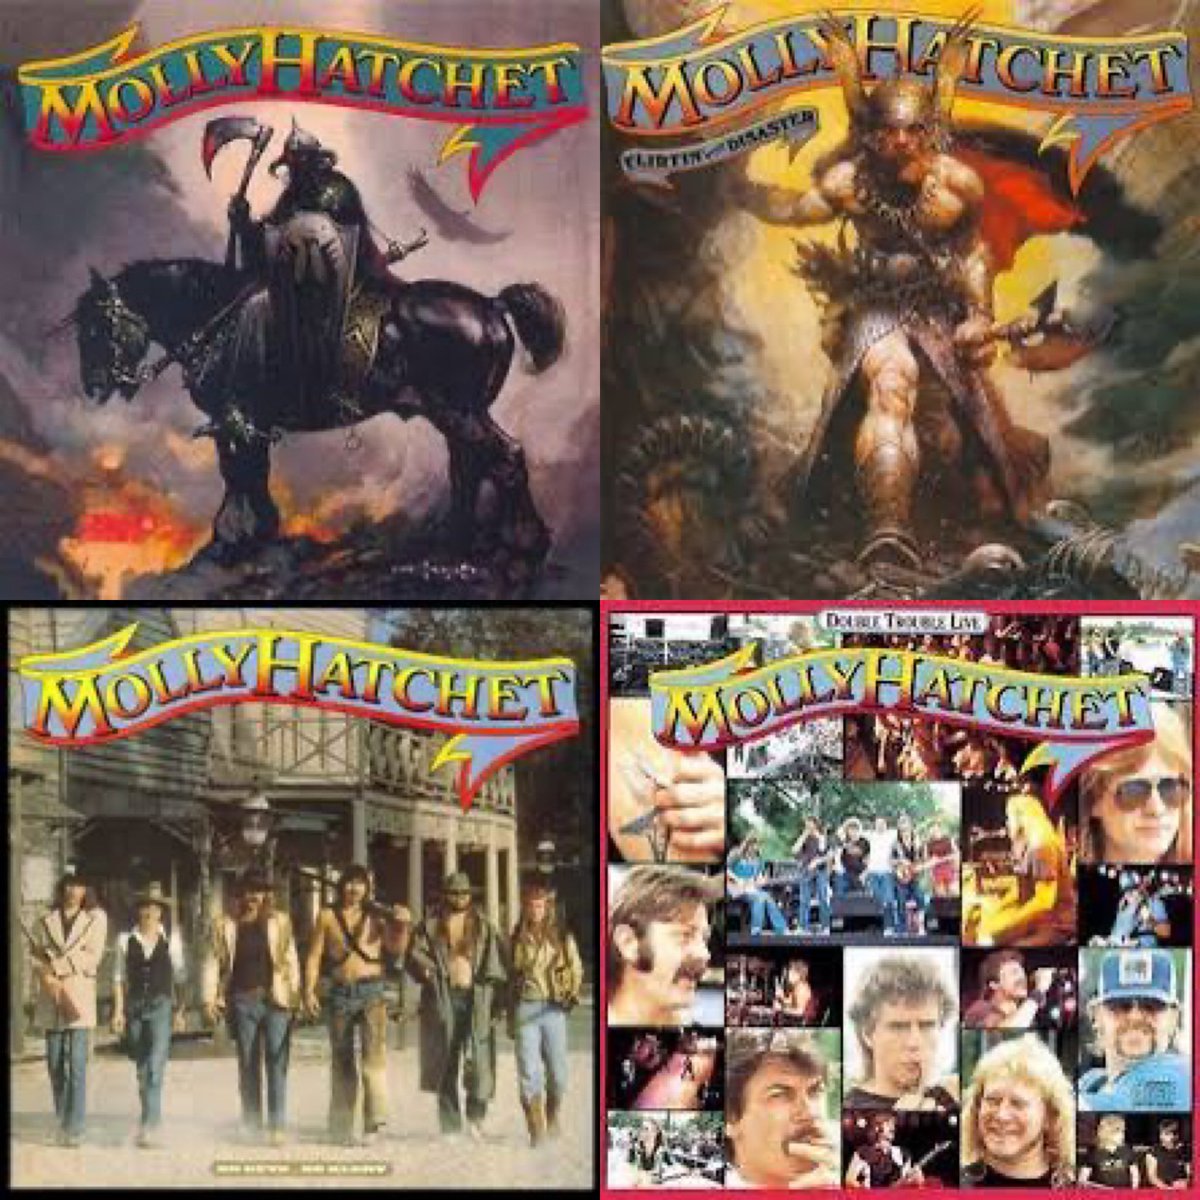 Molly Hatchet fans? In the late 70’s early 80’s they released some strong albums with great songs like Fall Of The Peacemaker, Whiskey Man, Bounty Hunter and many others. Sadly, all the original members are dead. Great southern rock band. Check these albums out.